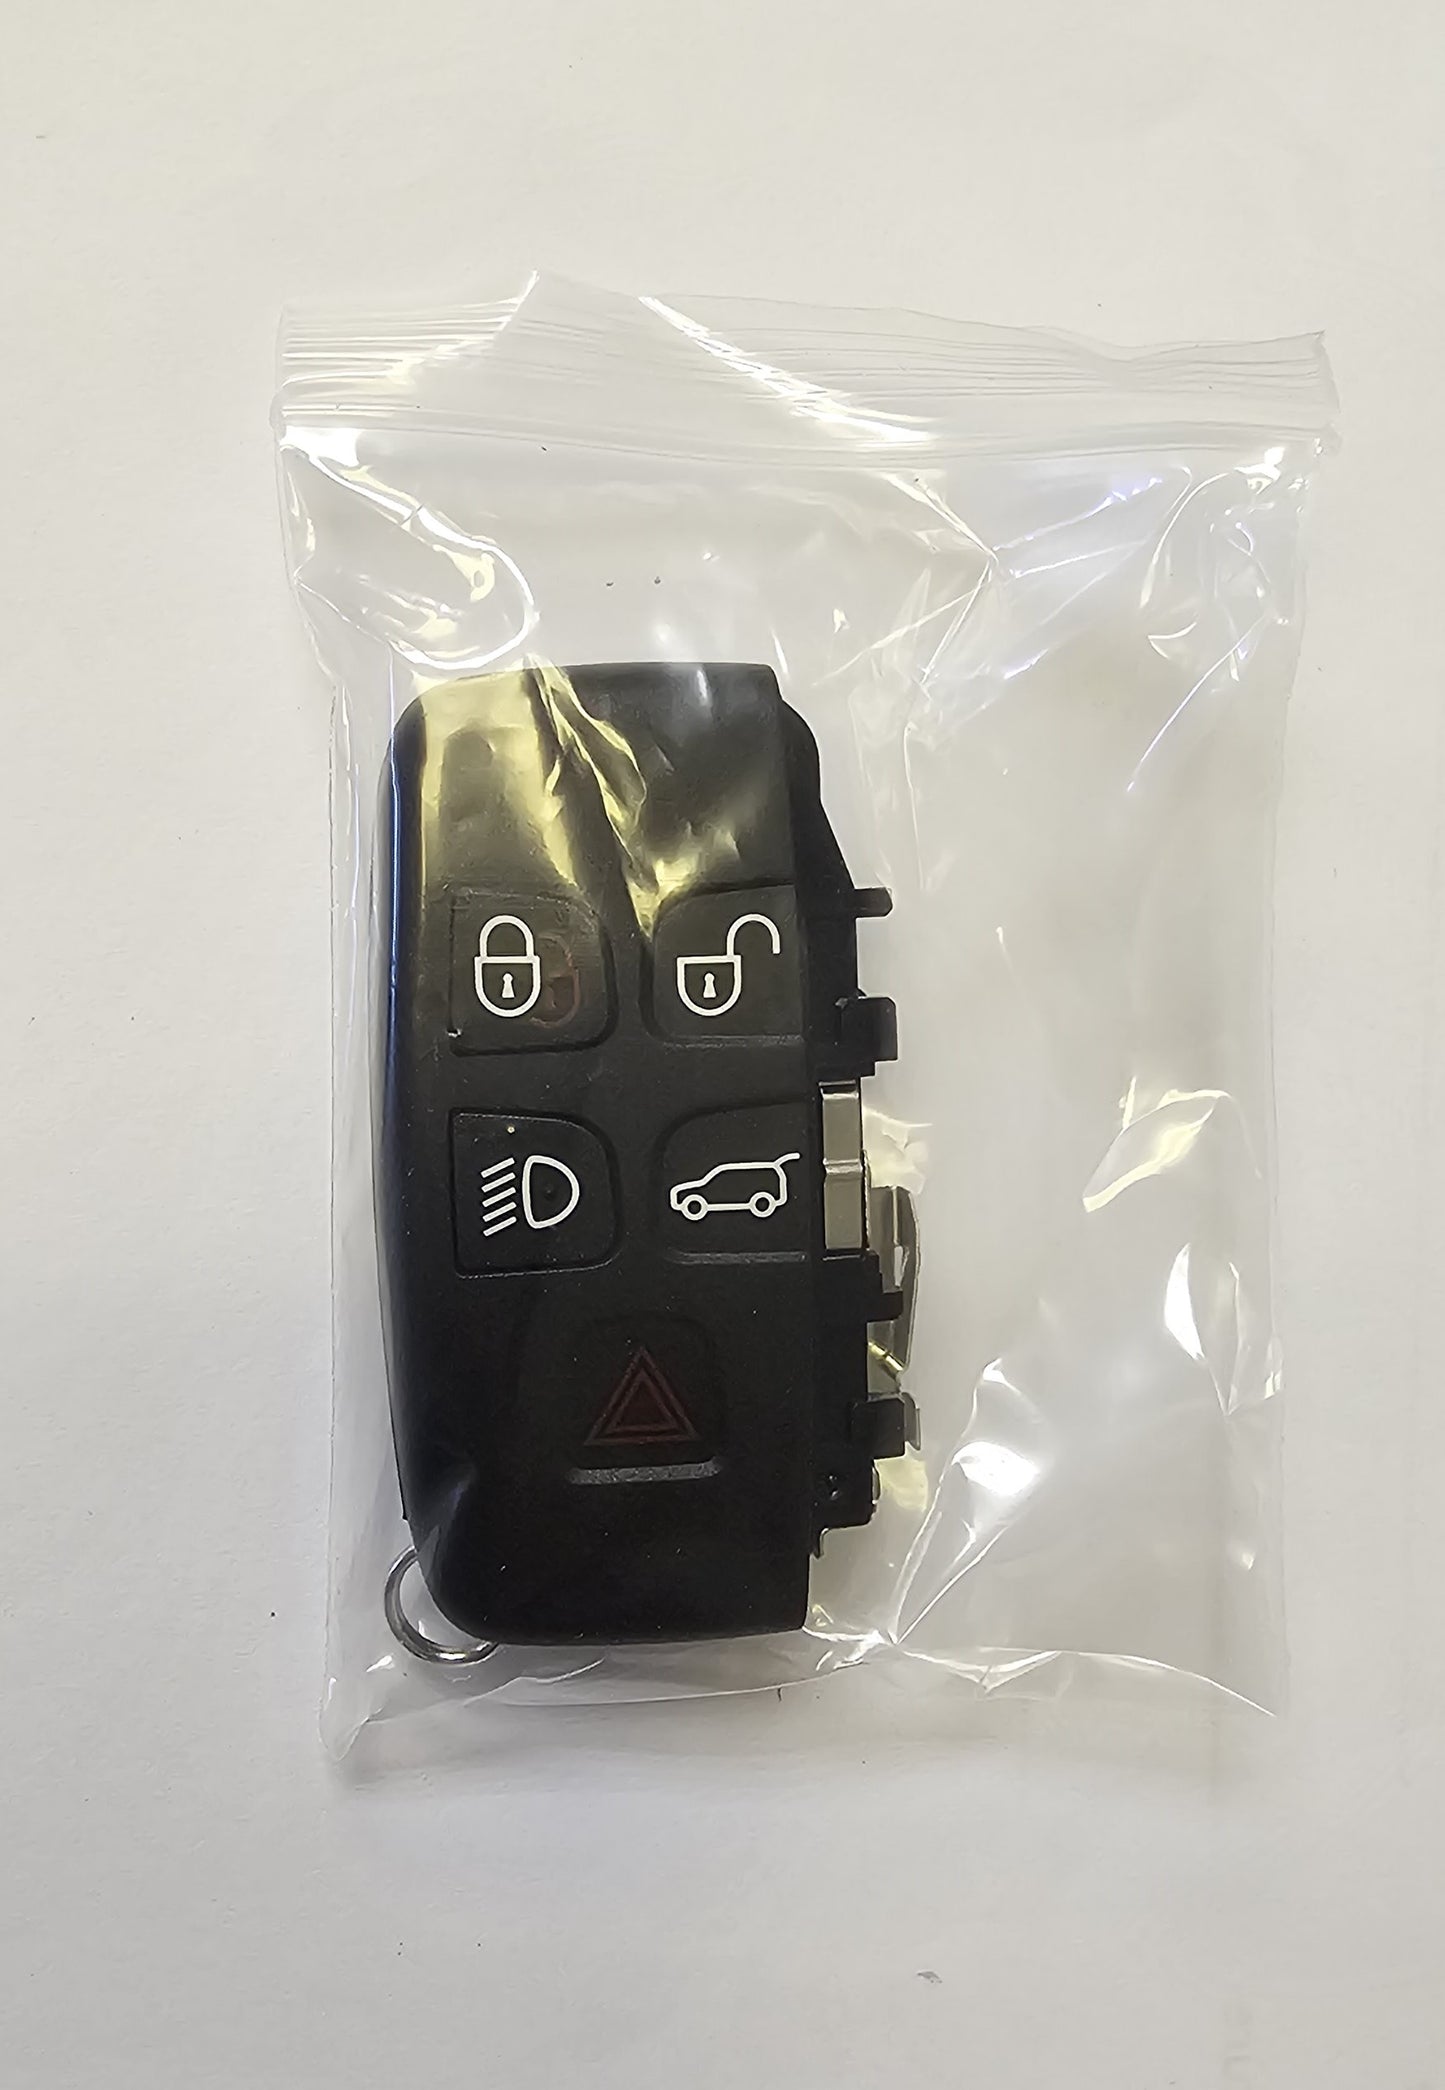 Land Rover Discovery 4 Key Remote Case Cover NEW GENUINE 2010-16 LR078922